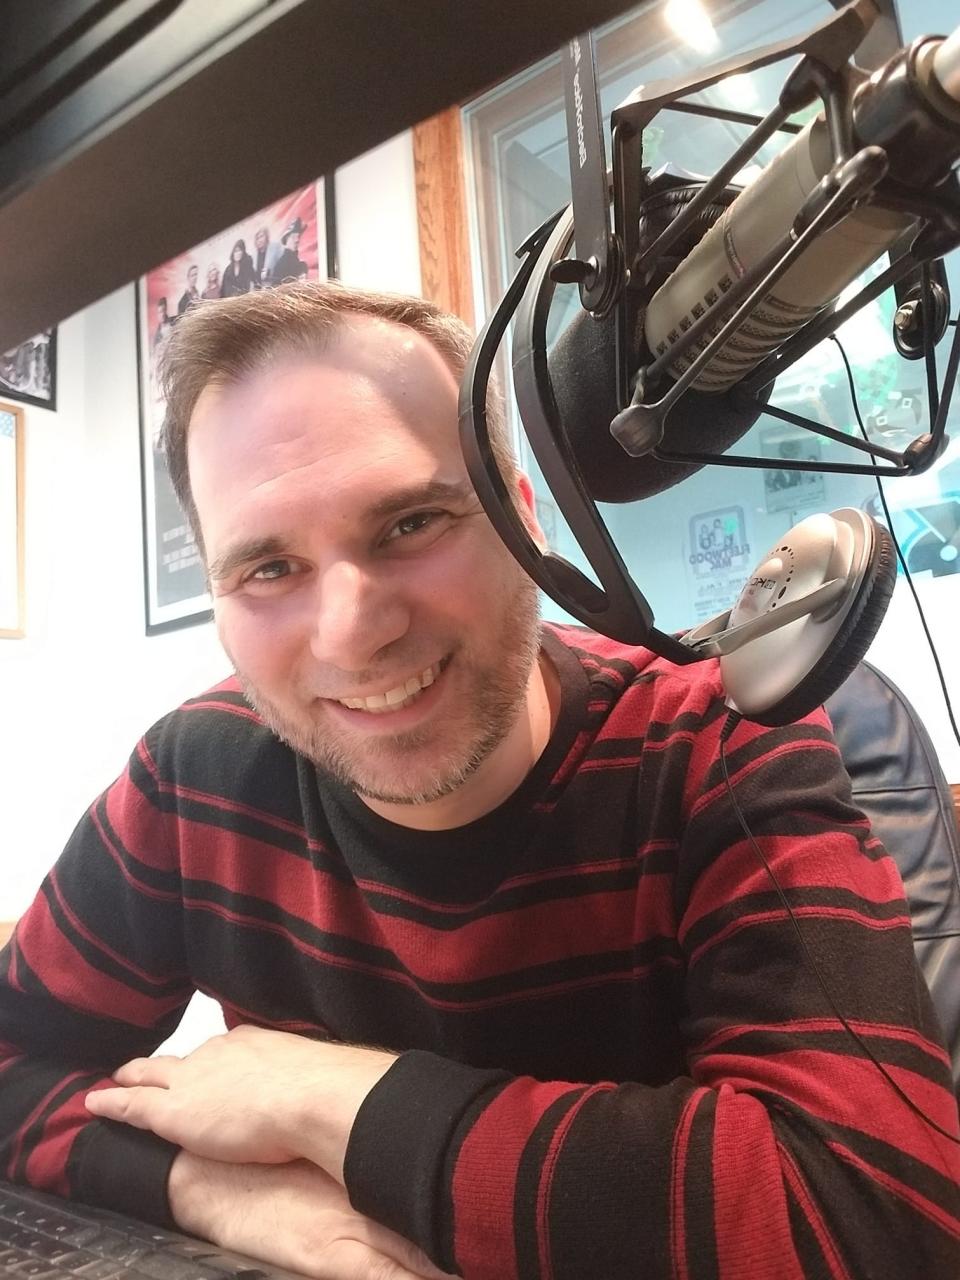 Ryan McCall was the music director for country music station WGLR-FM (97.9) in Lancaster. Now based in West Bend, the life-long comic book fan has written his first comic, "Female Force: Loretta Lynn," which coincidentally was released the week she passed.